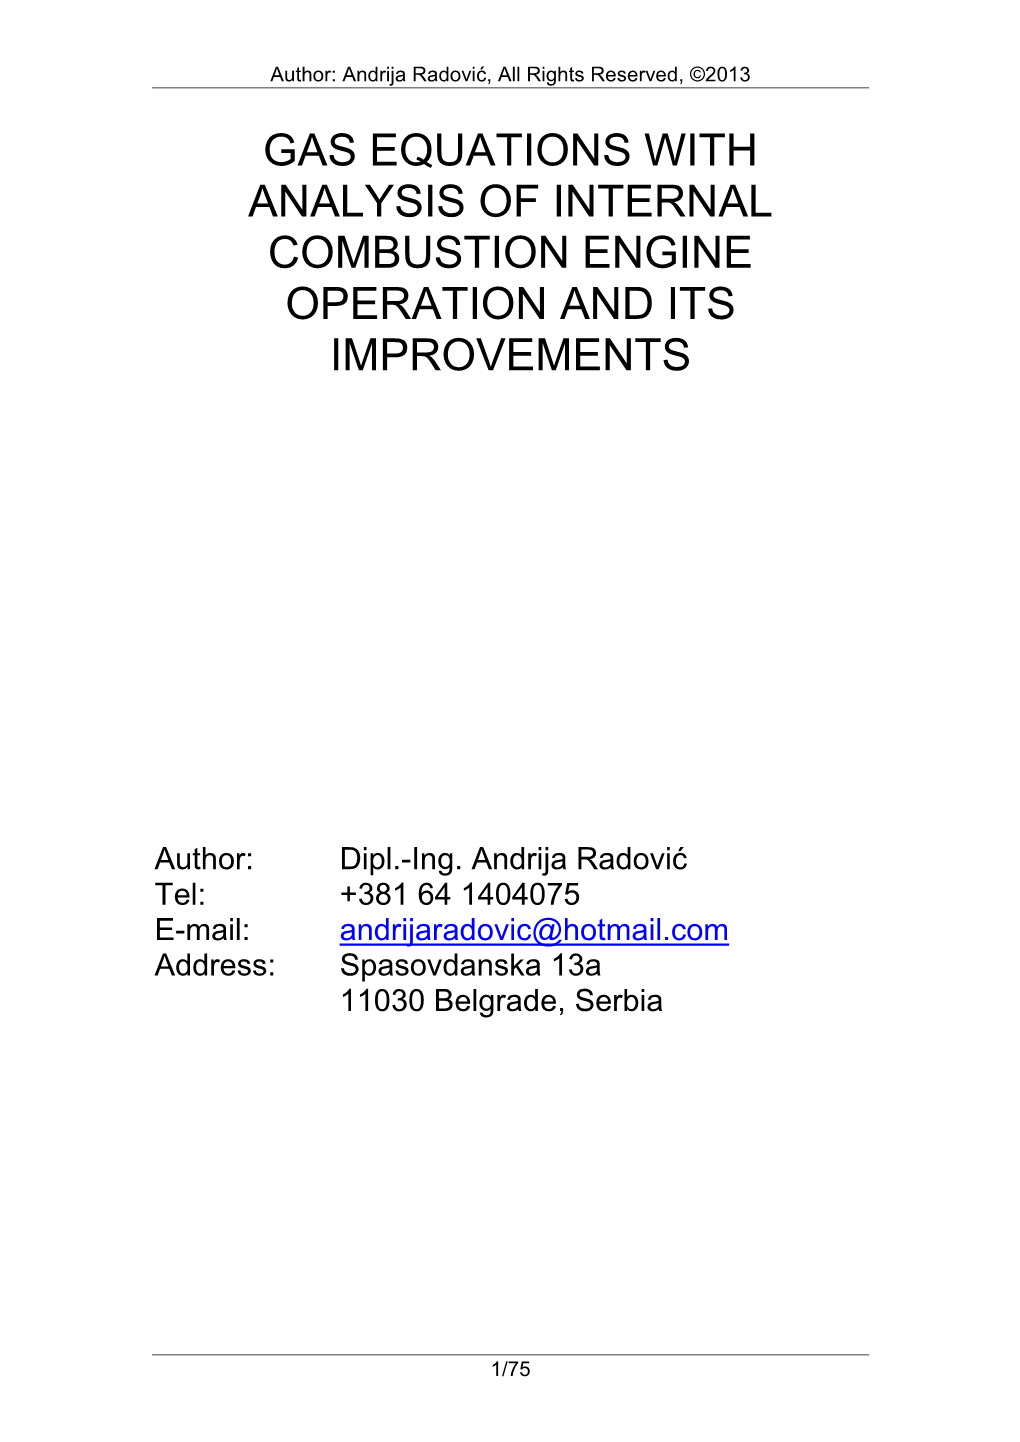 Gas Equations with Analysis of Internal Combustion Engine Operation and Its Improvements